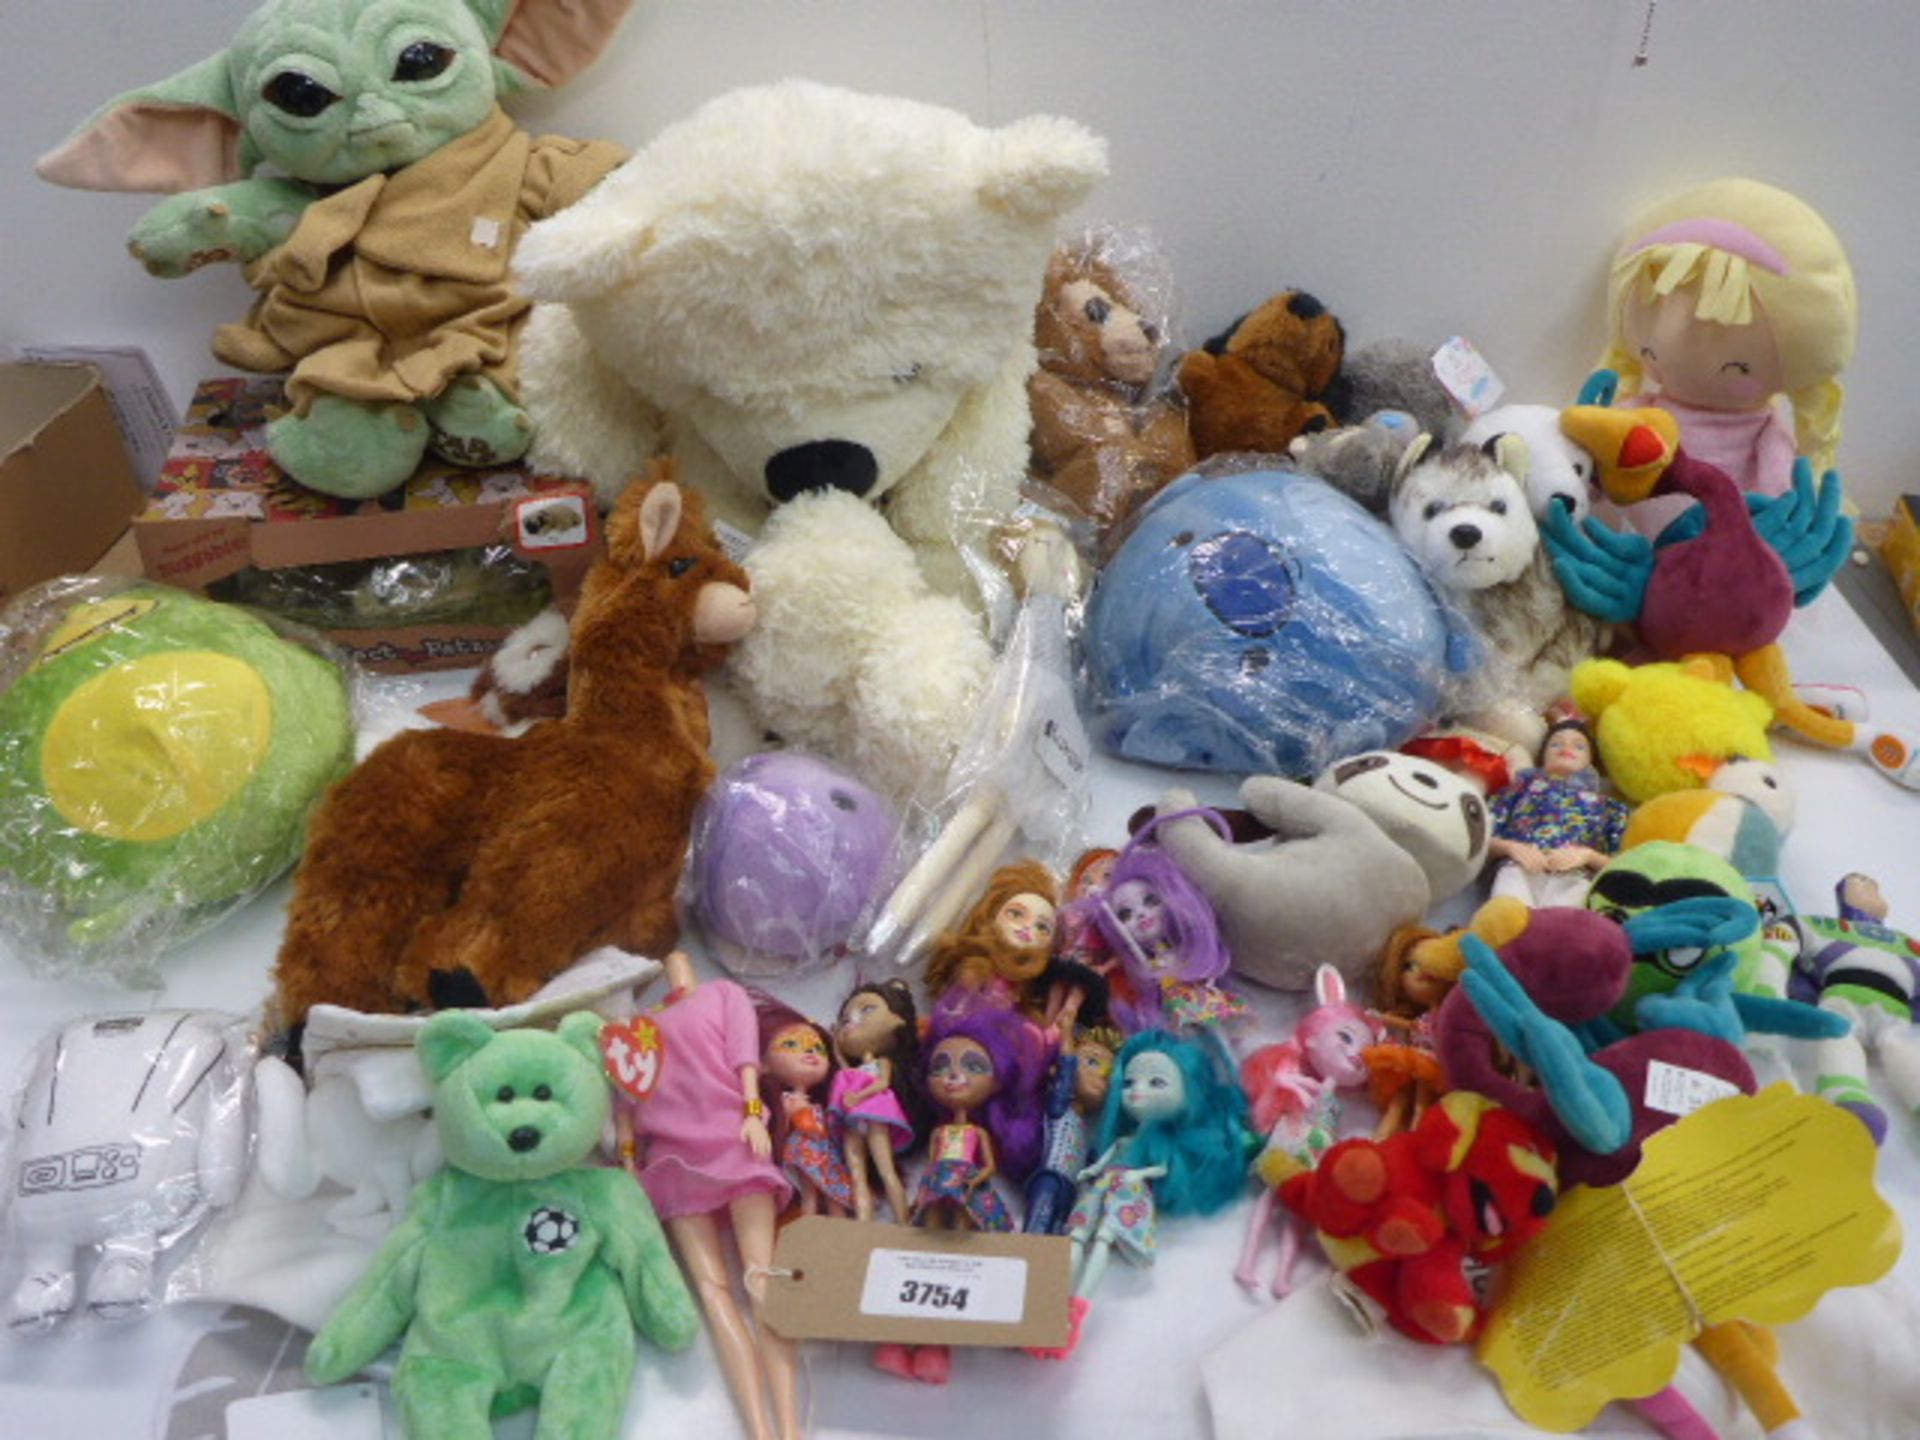 Selection of soft cuddly toys including TY, Huggable Petz, dolls etc